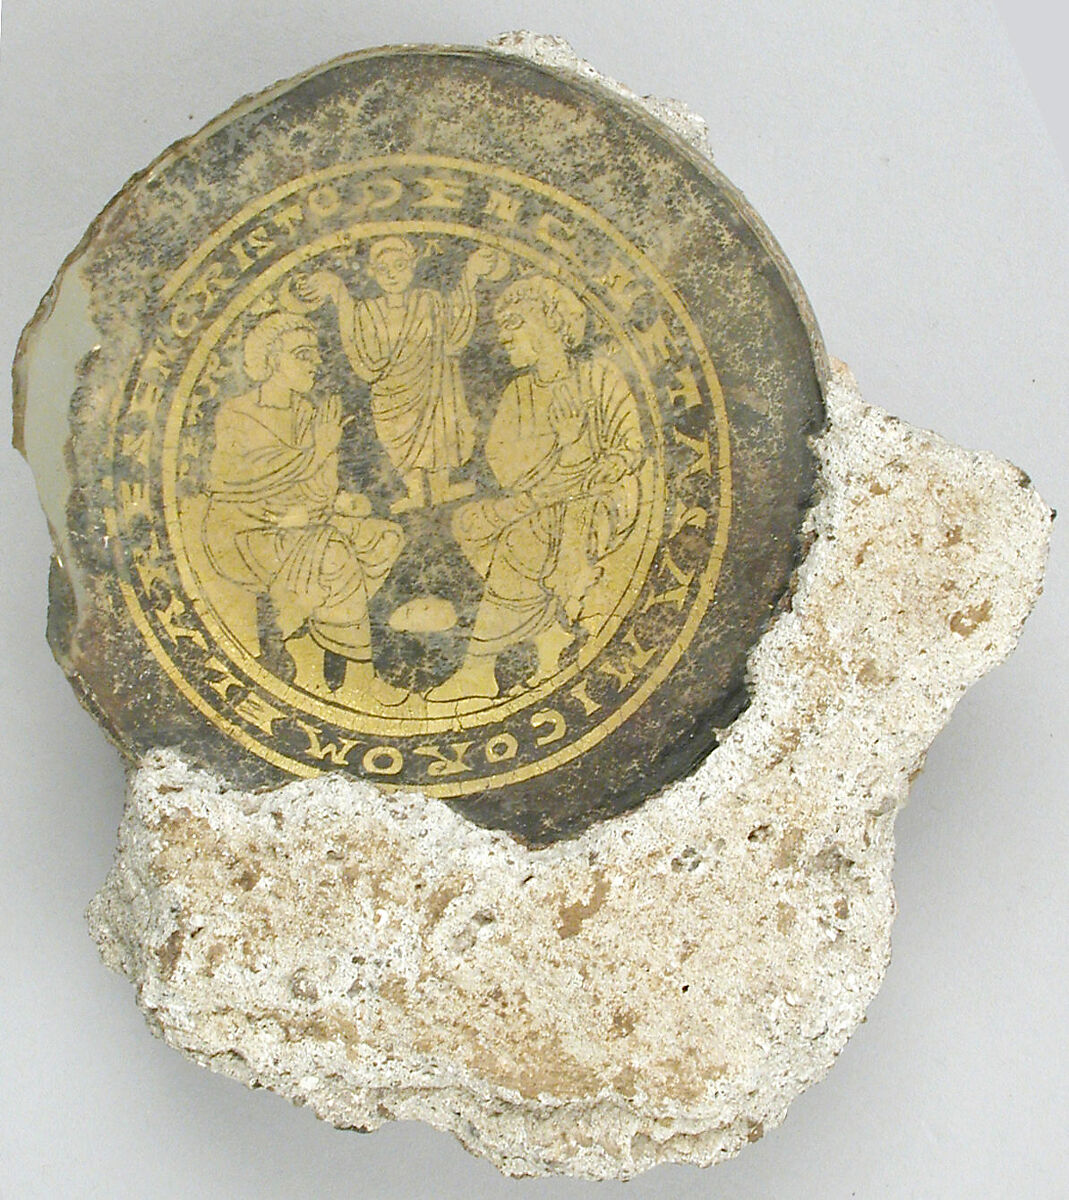 Bowl Base with Christ Giving Martyrs’ Crowns to Saints Peter and Paul, Glass, gold leaf, Roman or Byzantine 